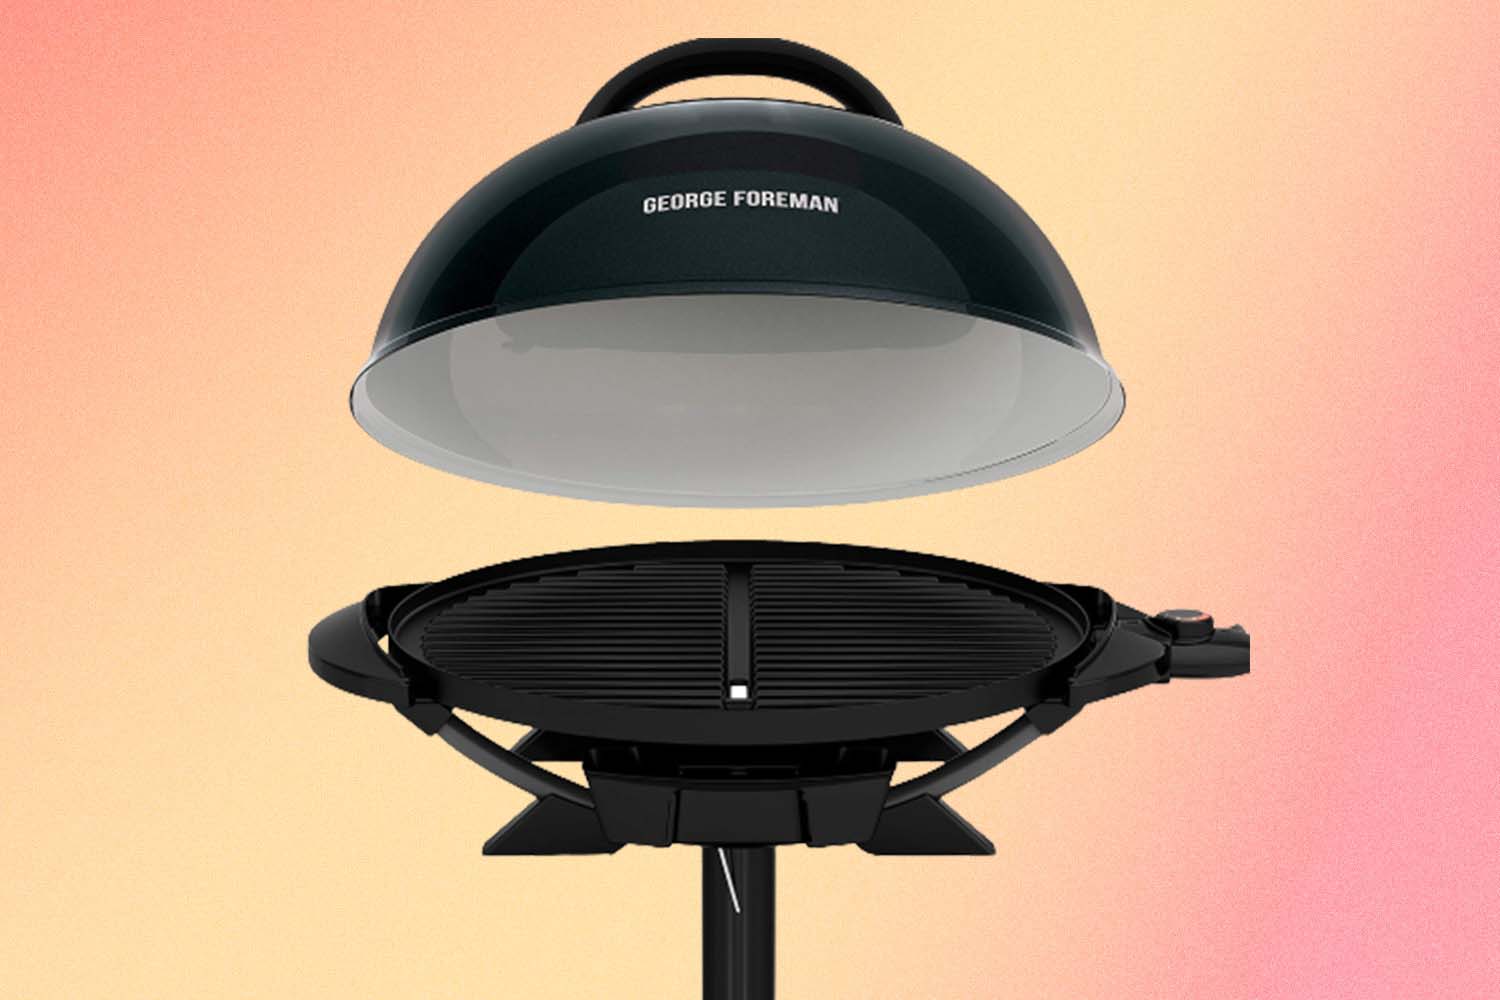 Stuff We Swear By: George Foreman Still Makes the Ideal Electric Grill